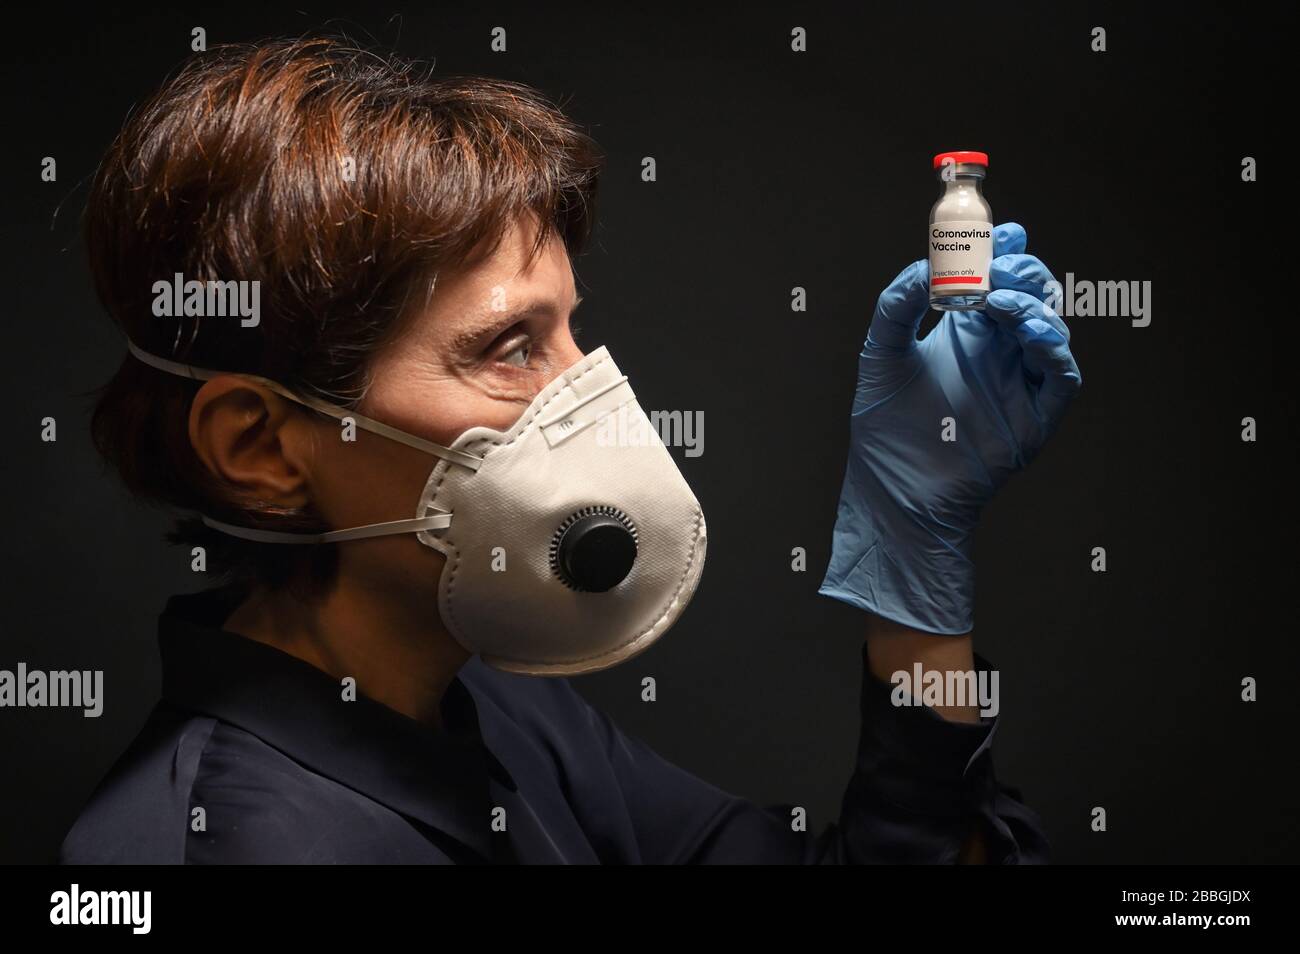 Woman Wearing Medical Protective Virus Mask and Vaccine Stock Photo